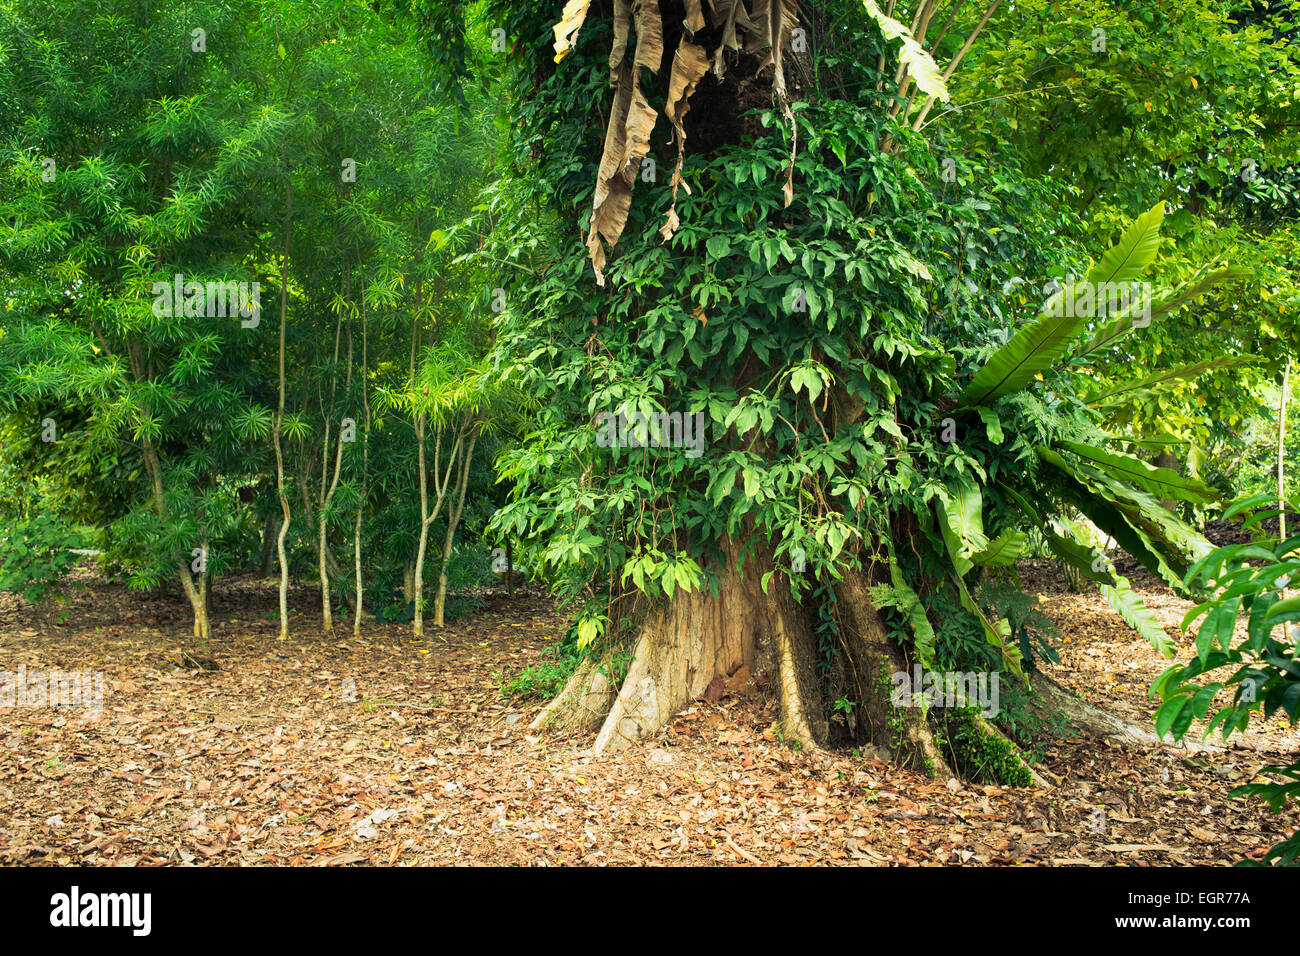 giant stem of pterocarpus indicus tree with many tropical plants in Singapore Botanical garden Stock Photo